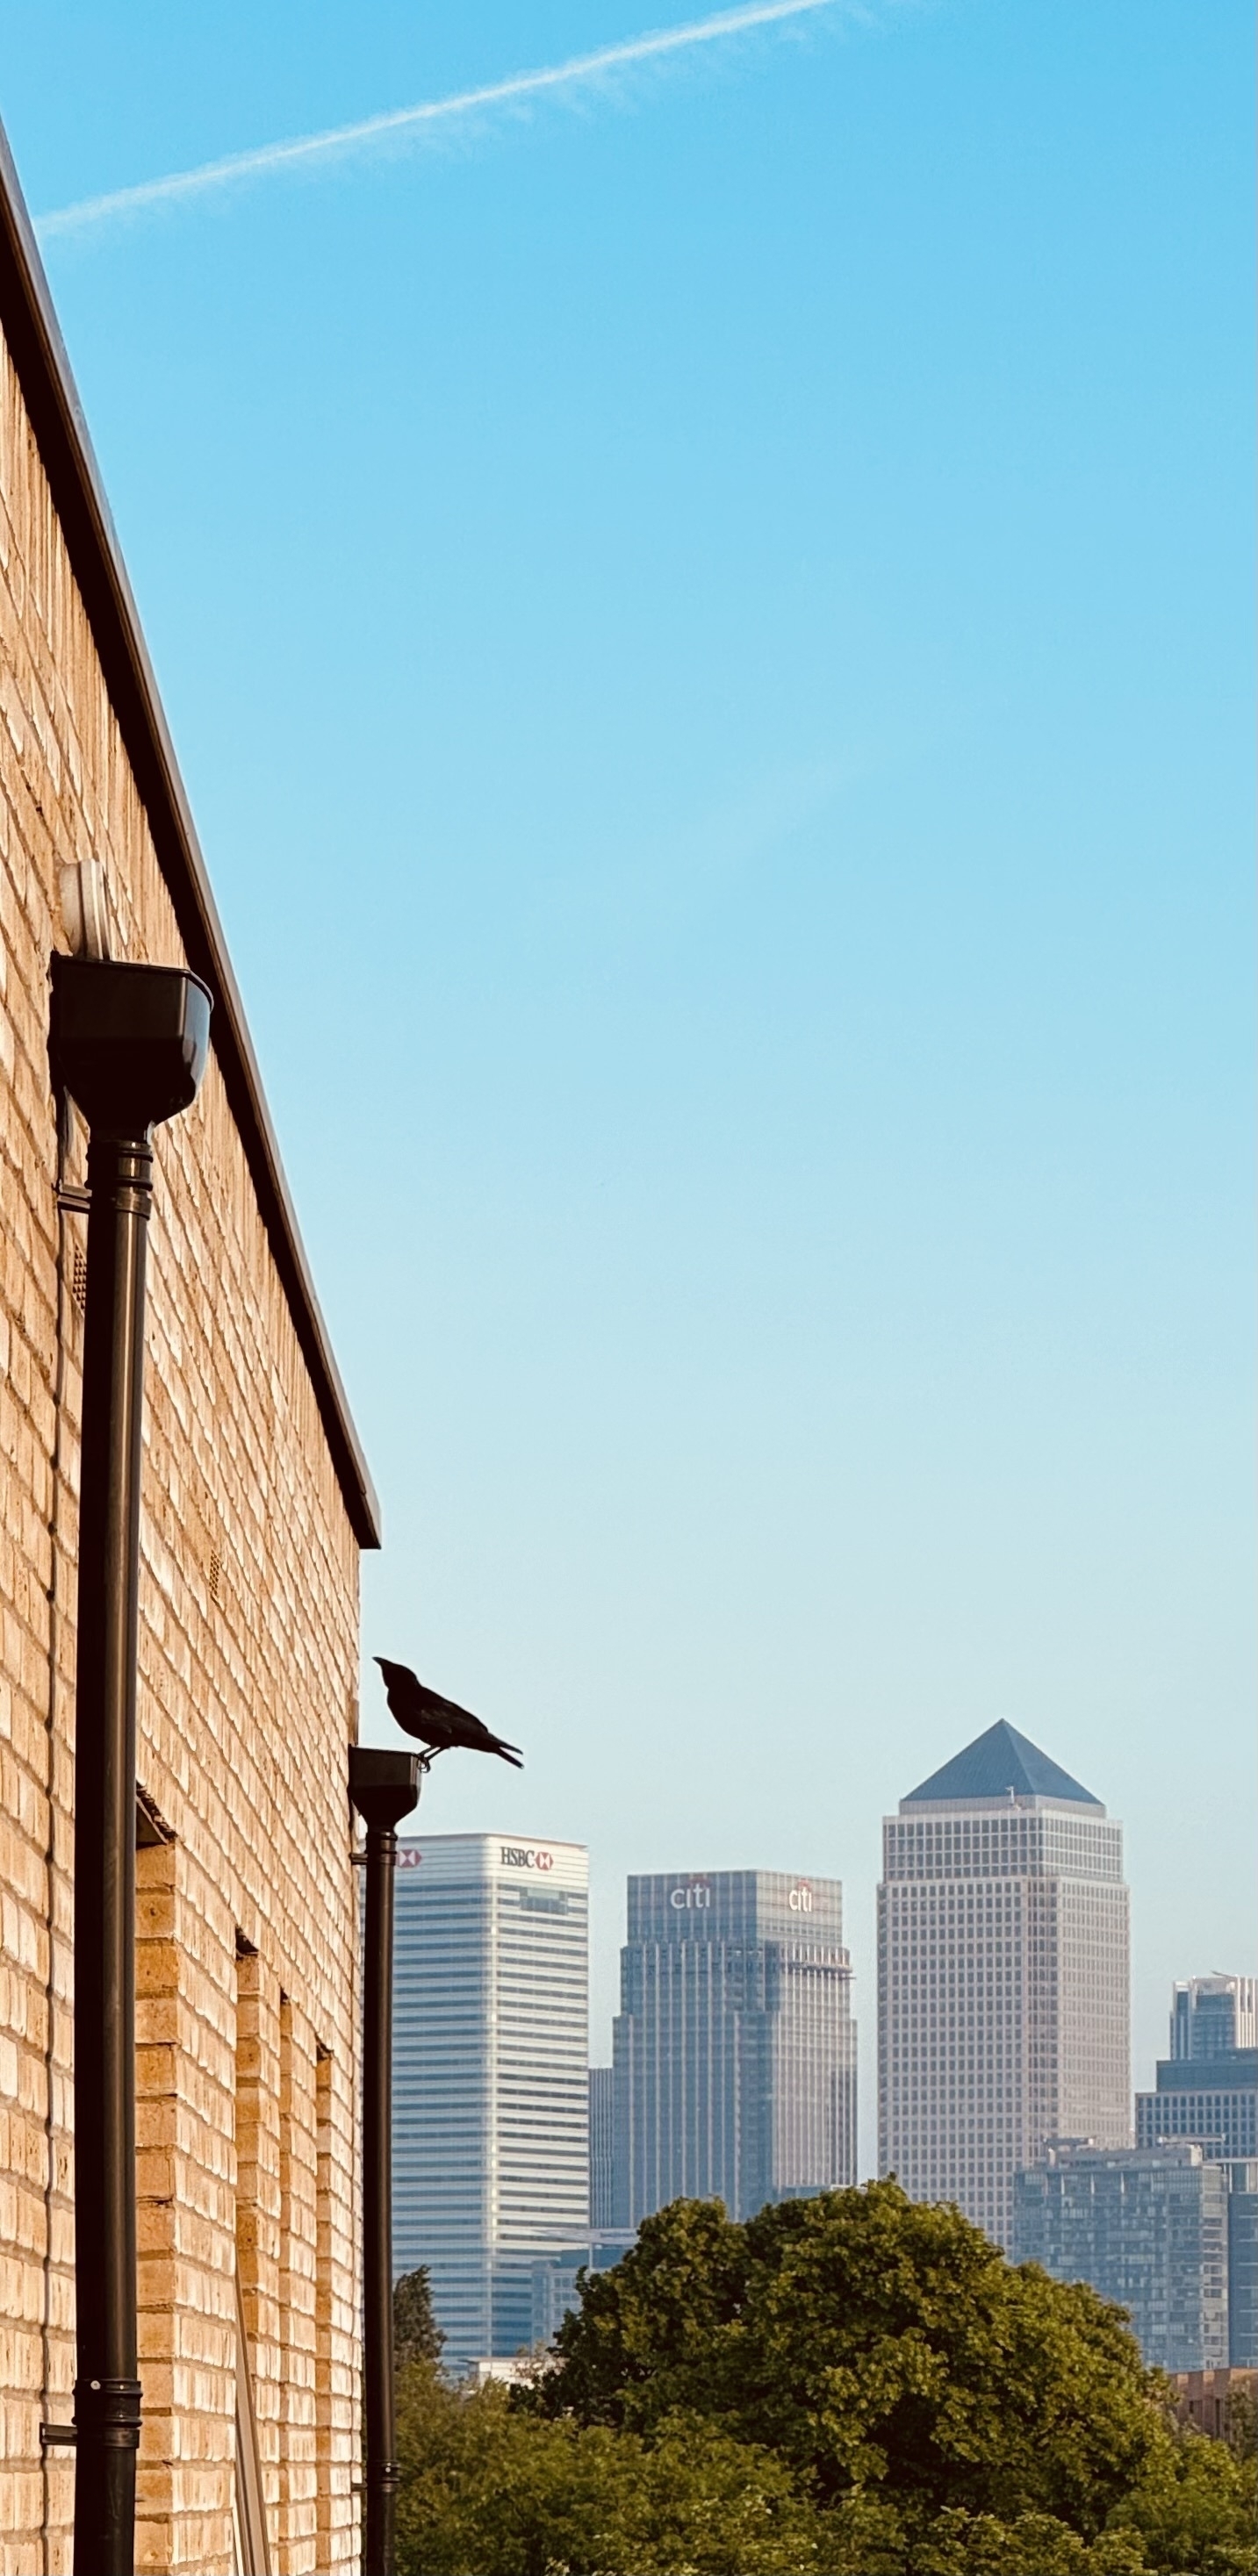 A bird perched on a gutter with the skyscrapers of Canary Wharf behind.